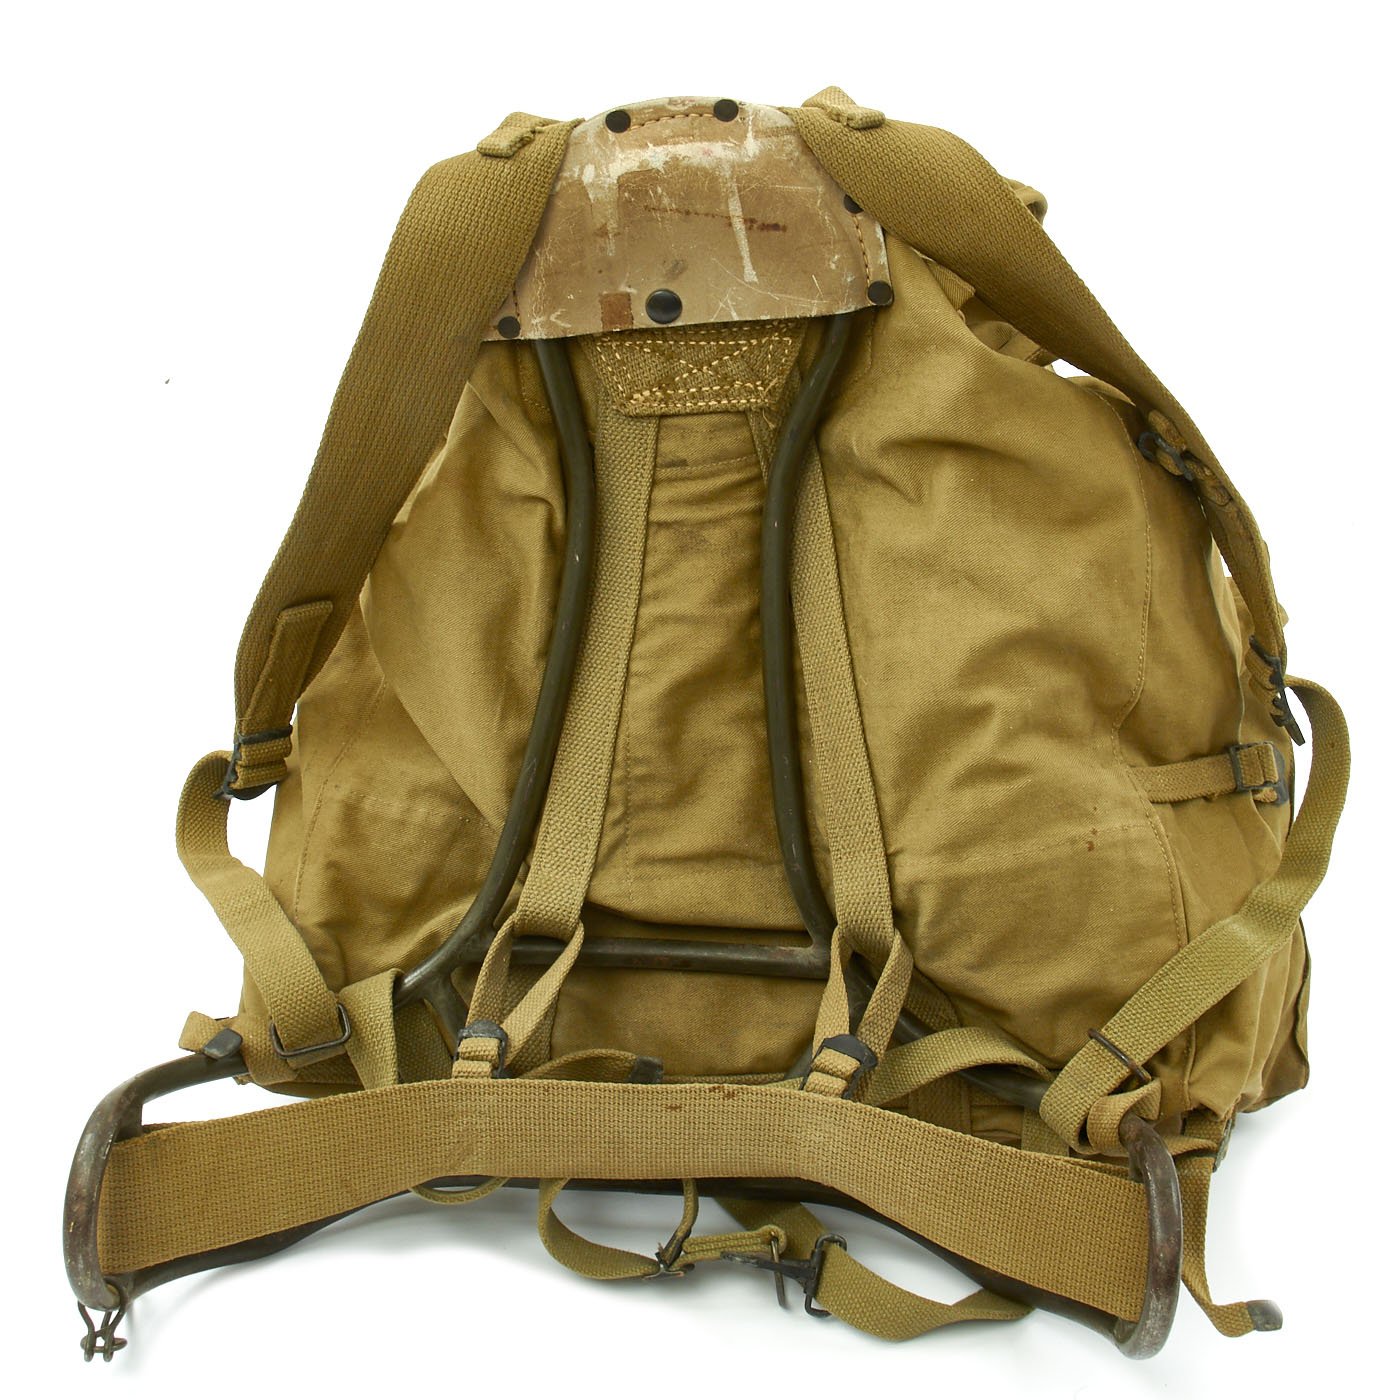 US Army Backpacks of WW2: History, Design and Uses - News Military